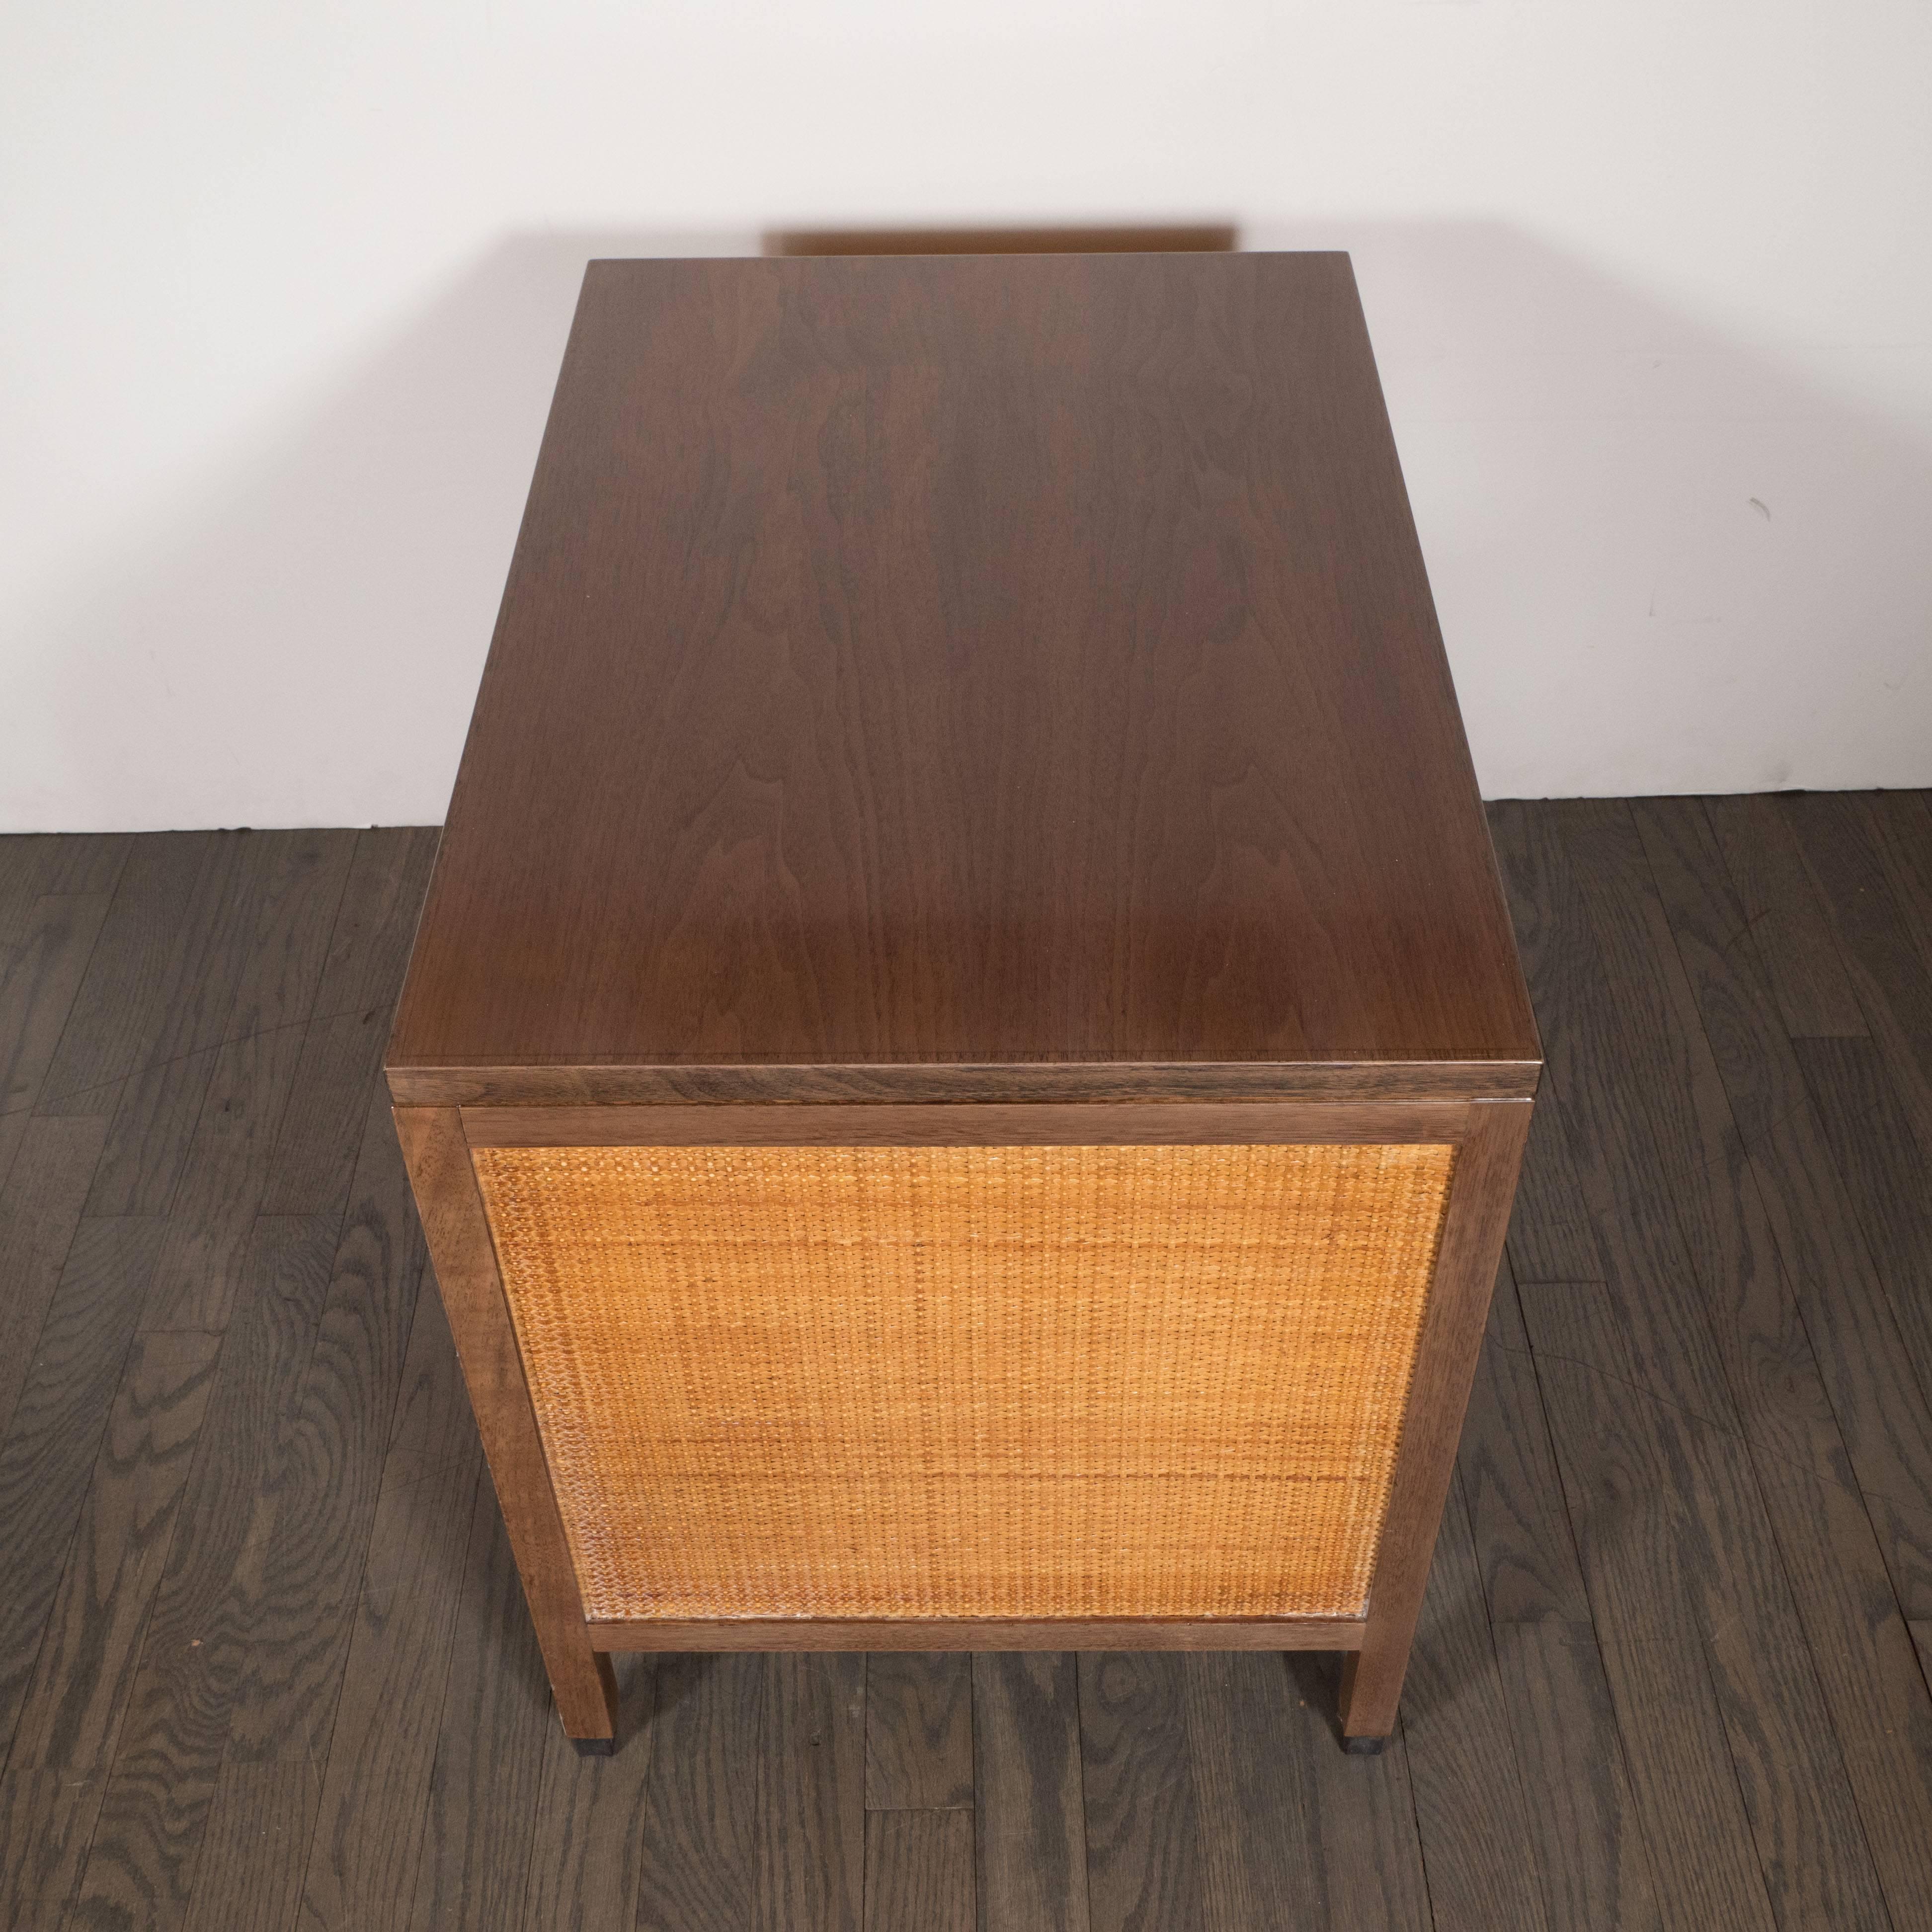 American Mid-Century Modern Hand Rubbed Walnut, Lacquer and Cane End Tables/Nightstands